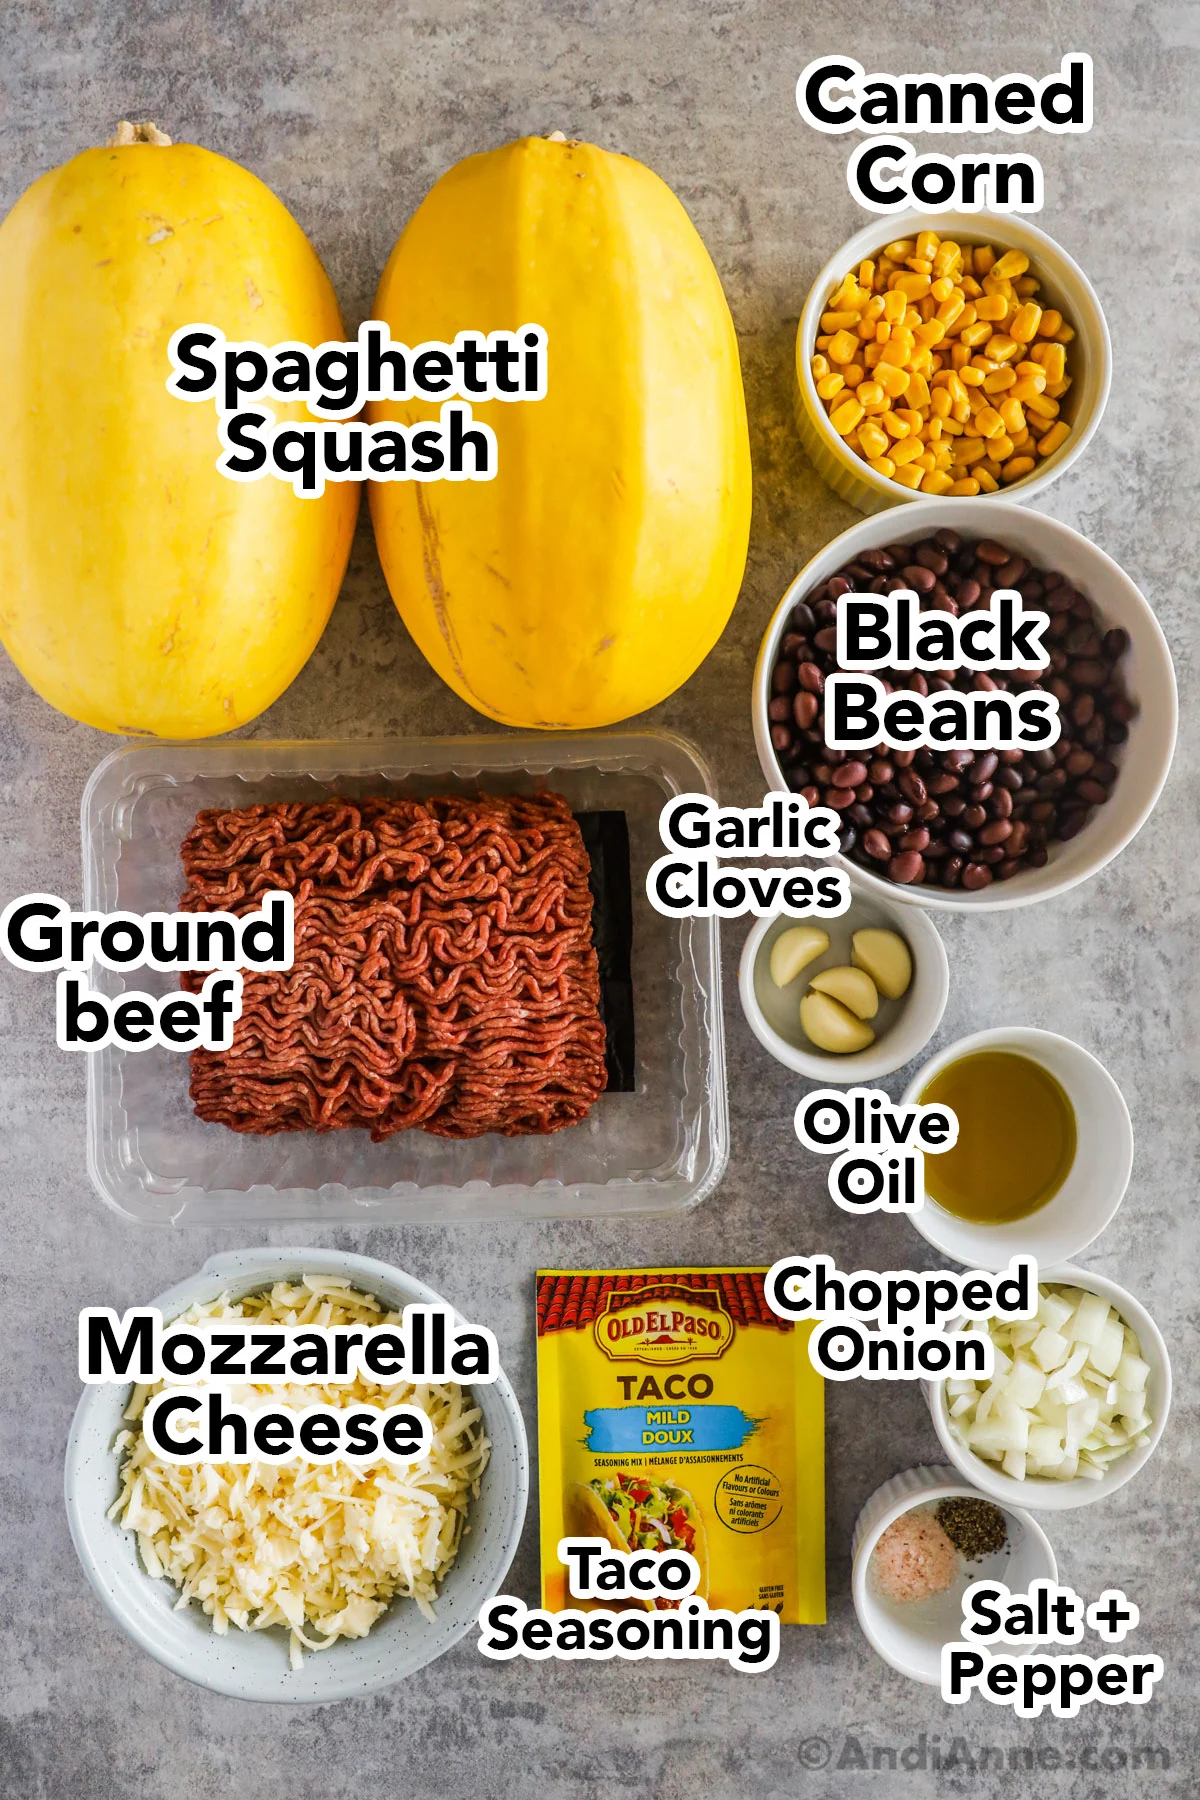 Recipe ingredients including spaghetti squash, ground beef, beans, garlic, oil, shredded cheese, spices.